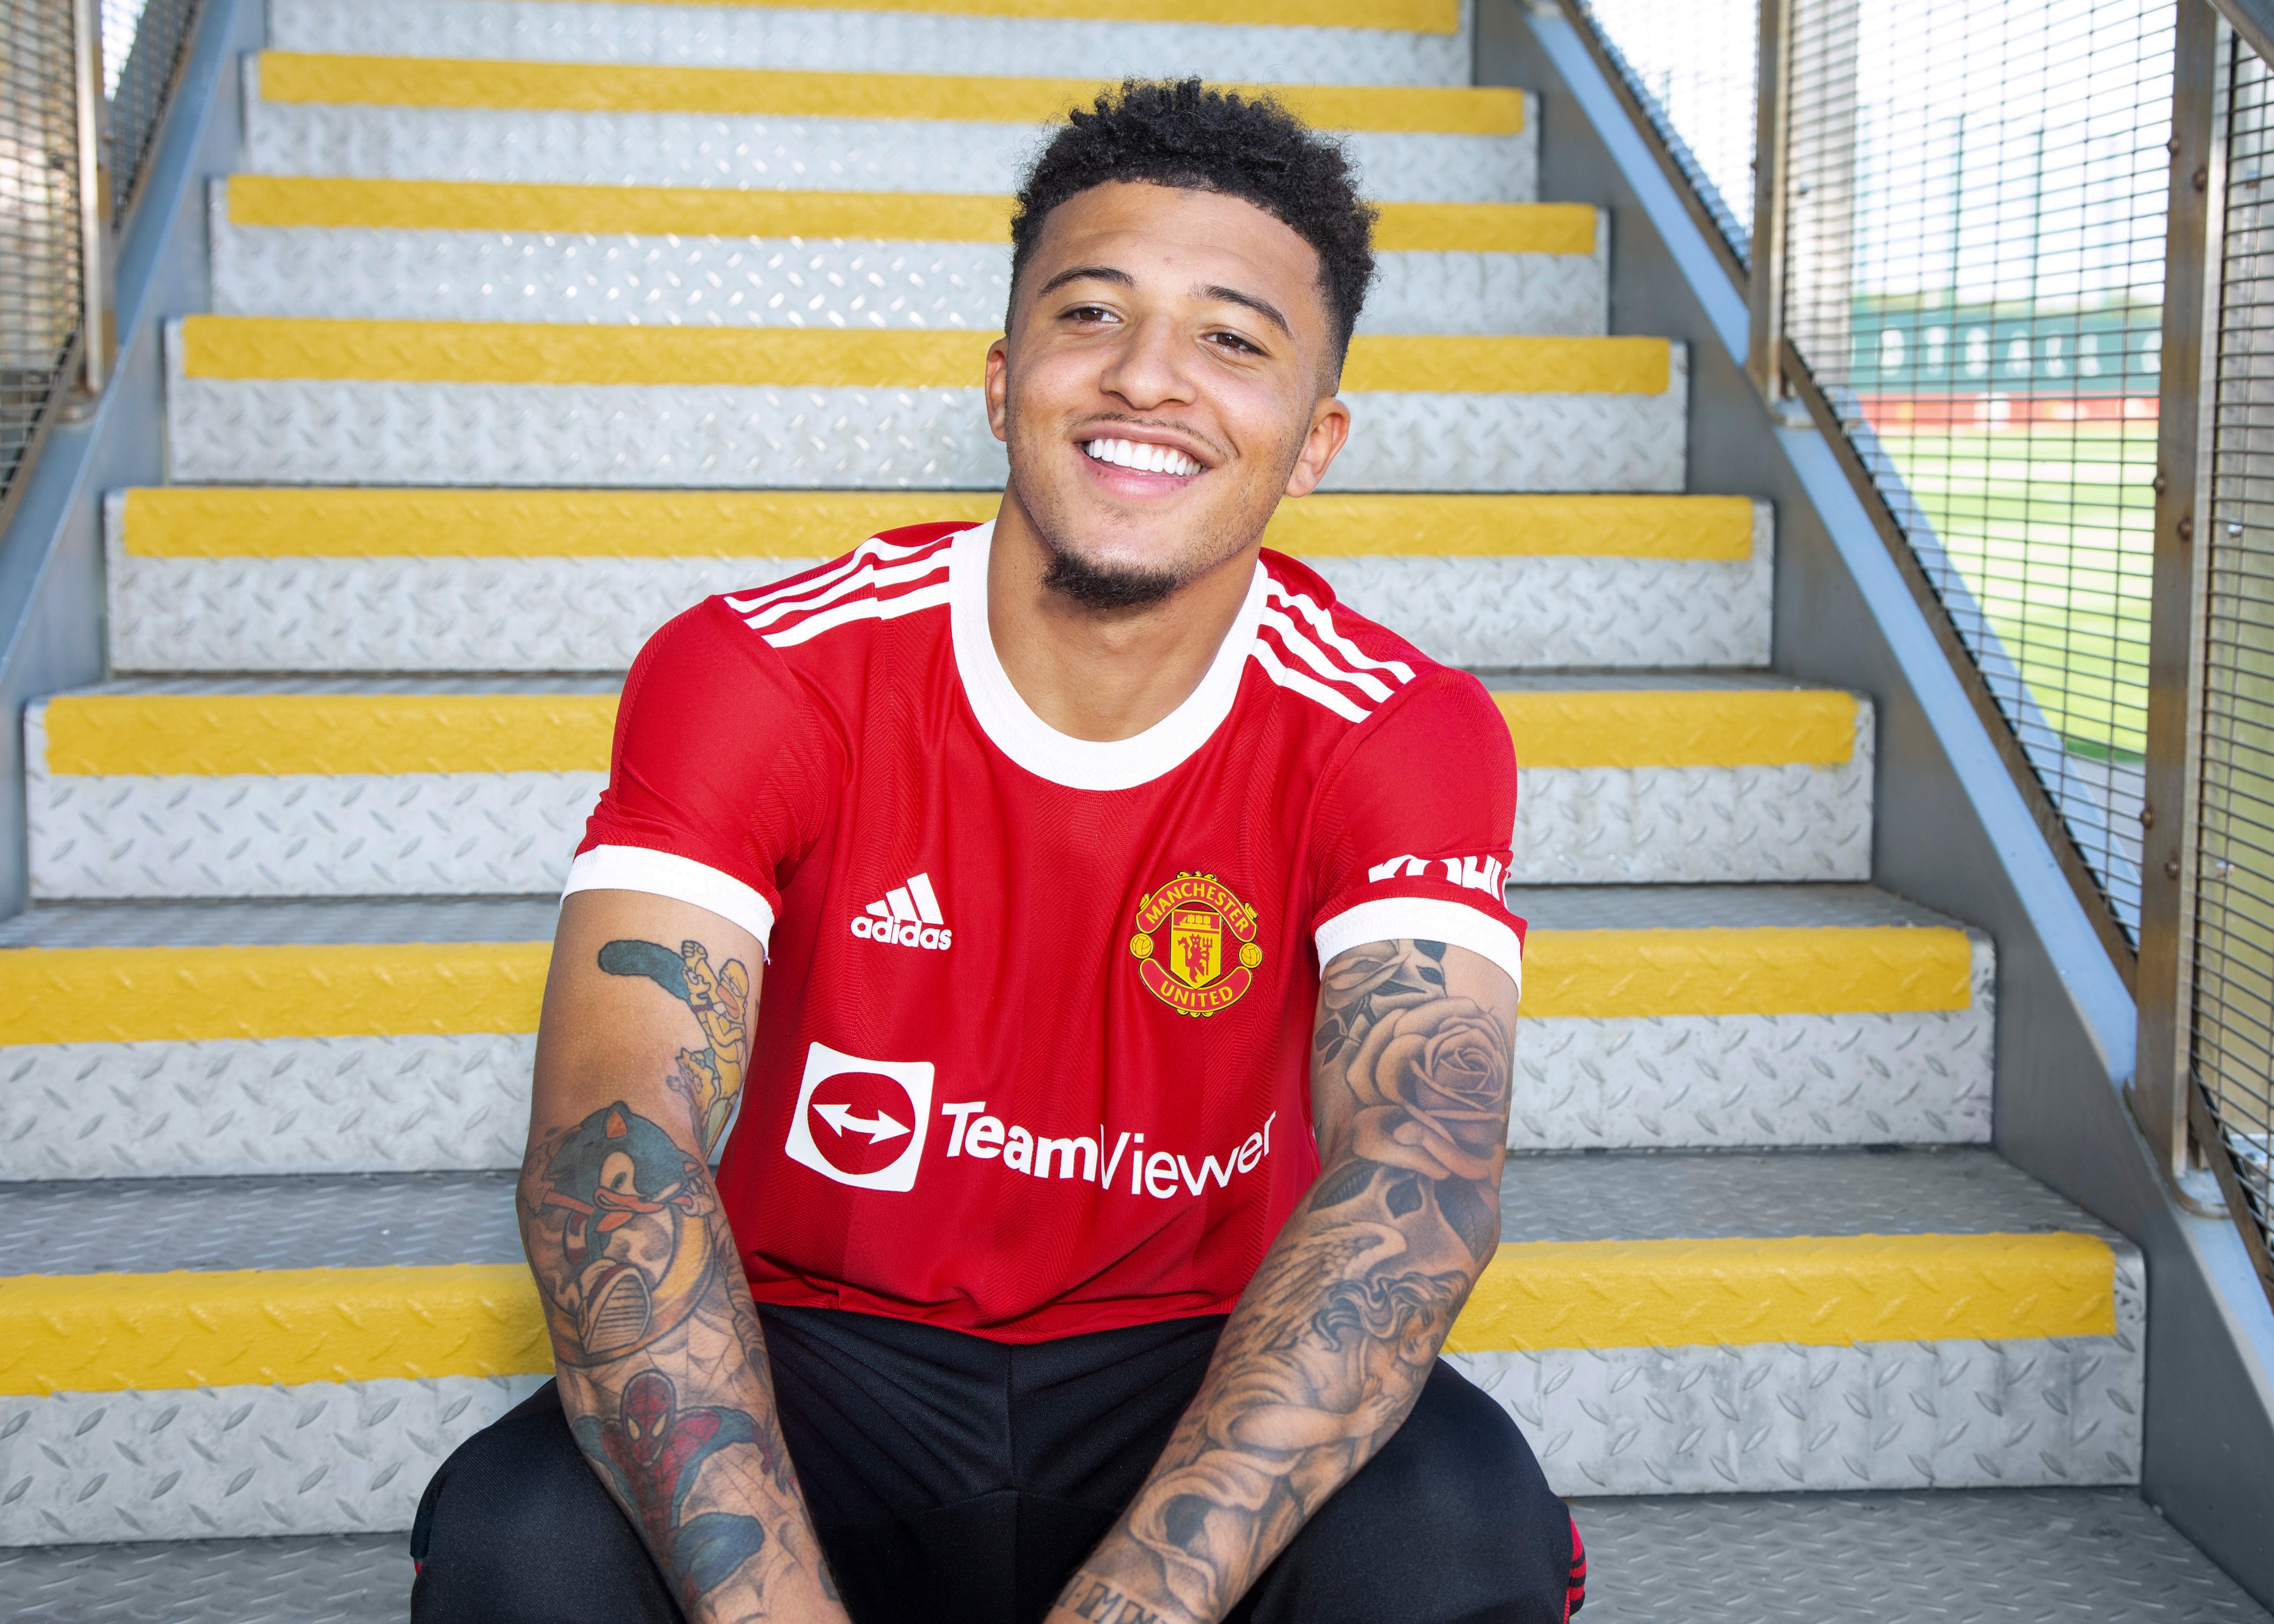 New signing Jadon Sancho of Manchester United is unveiled at Carrington Training Ground